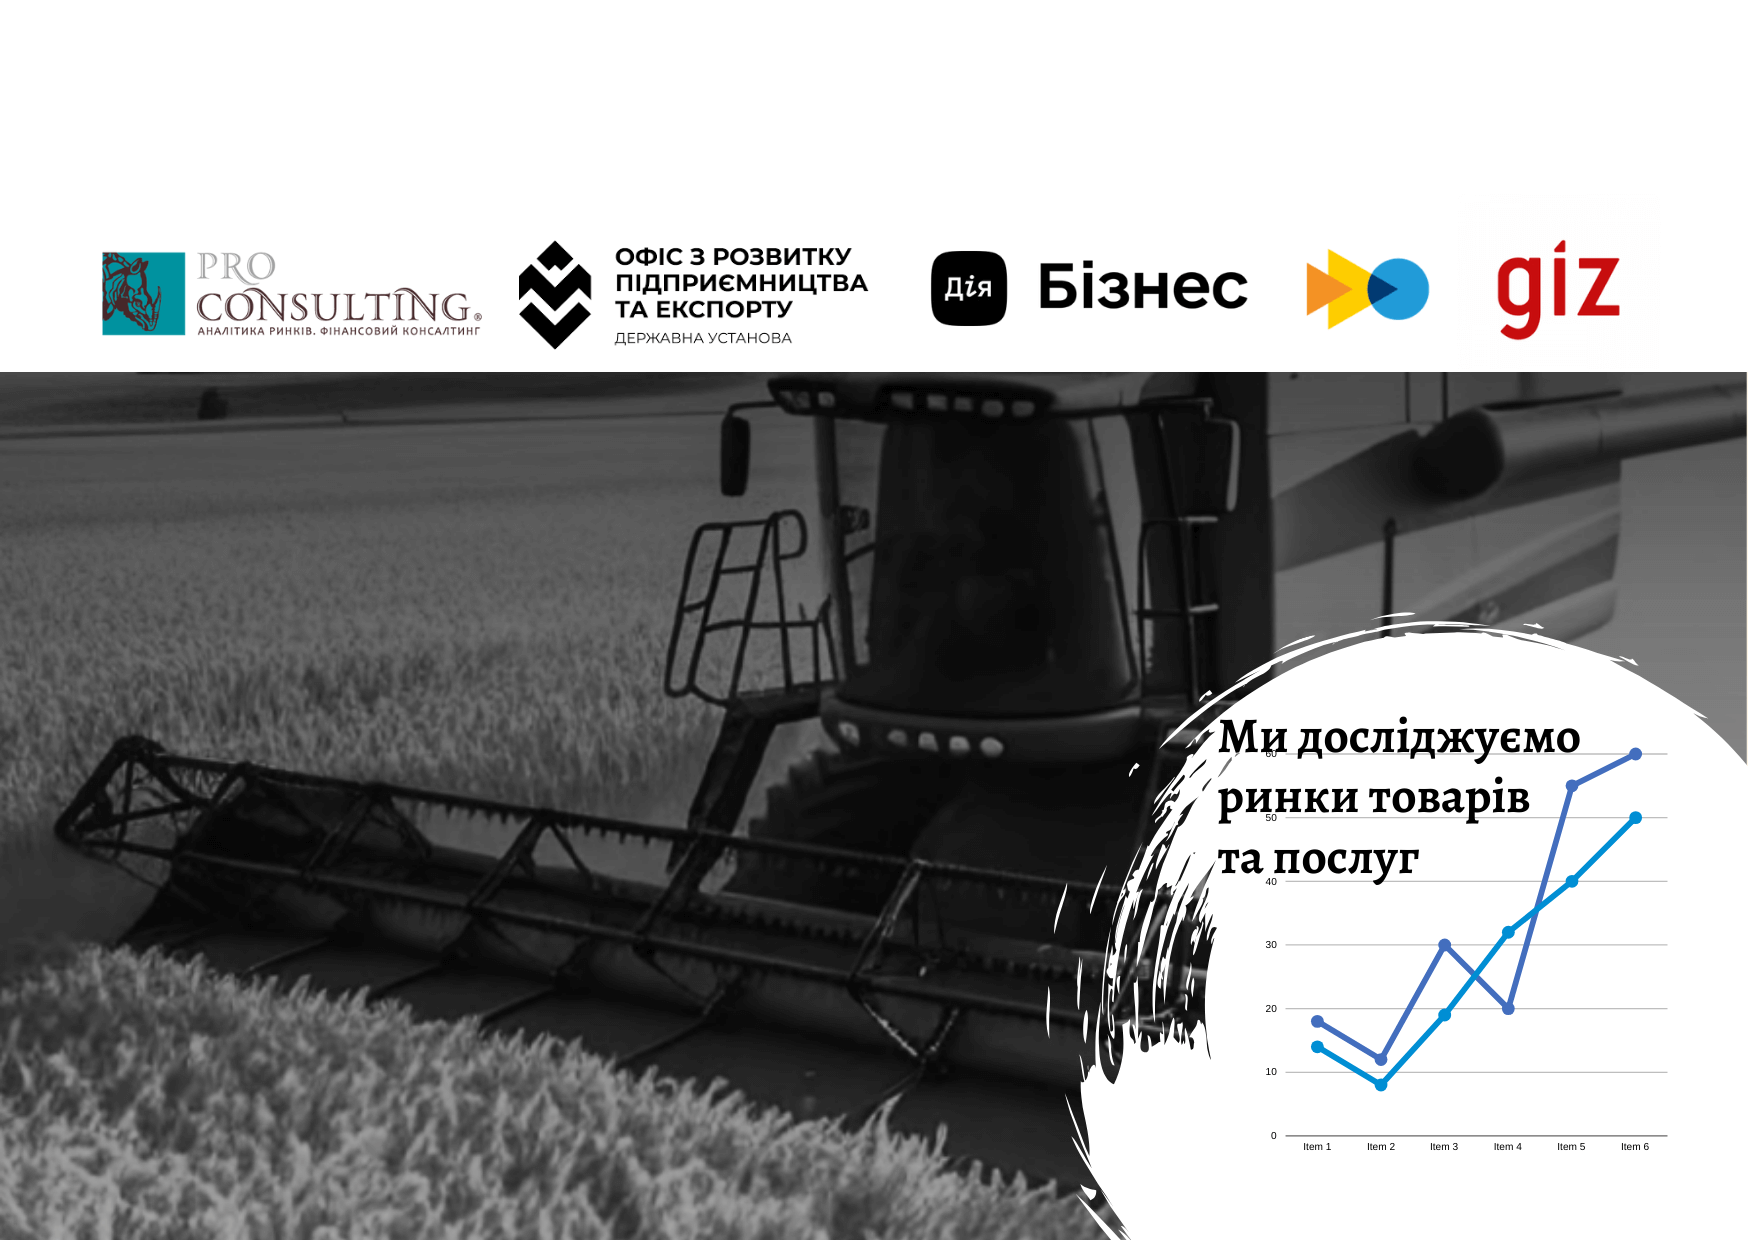 Ukrainian agricultural machinery market: current state and development prospects